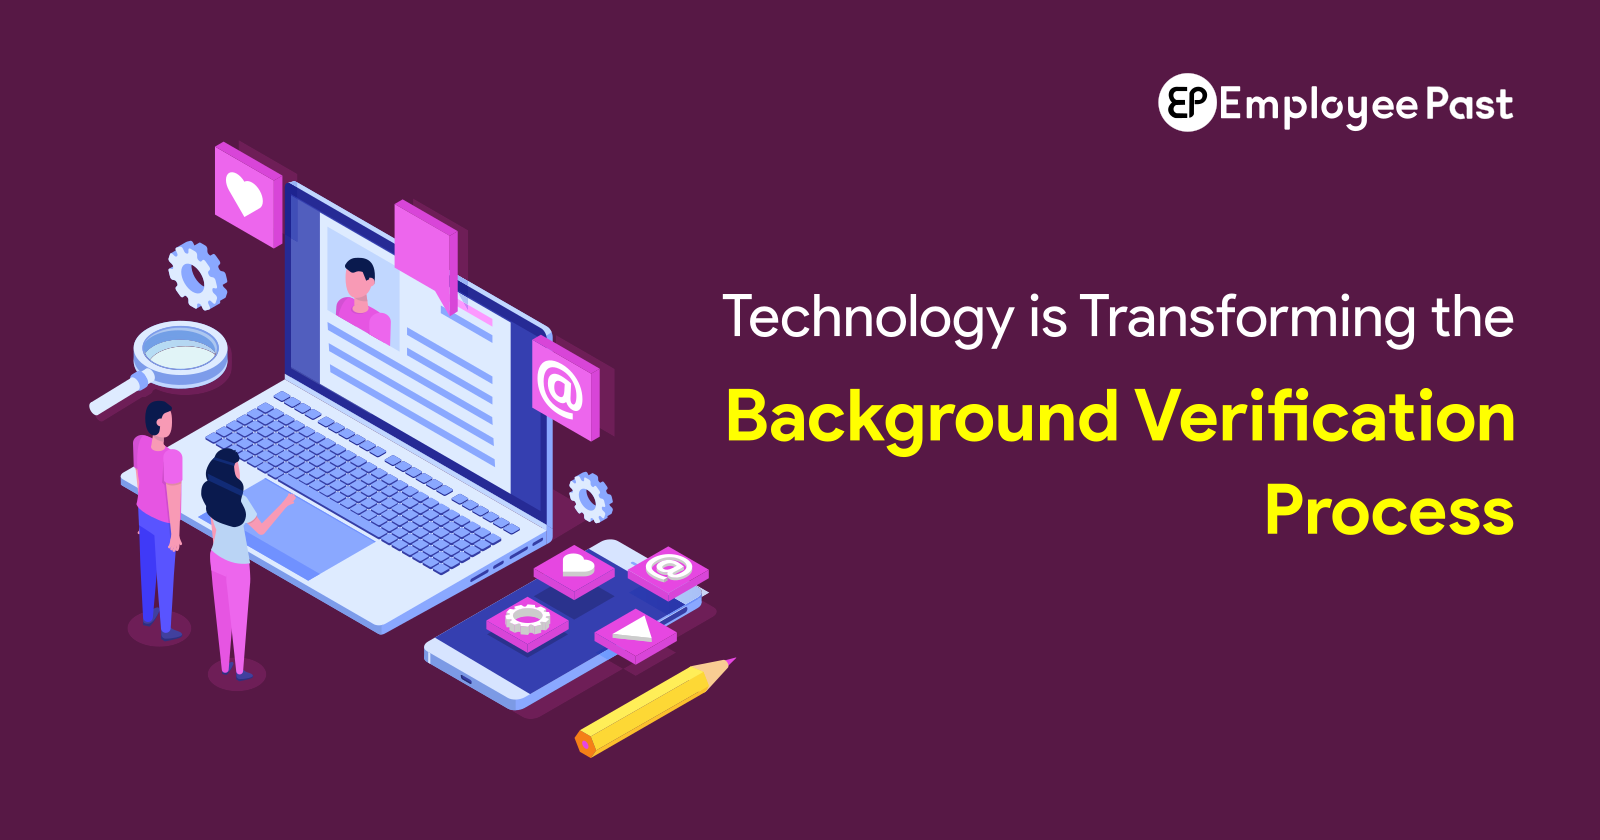 How Technology is Transforming the Background Verification Process?